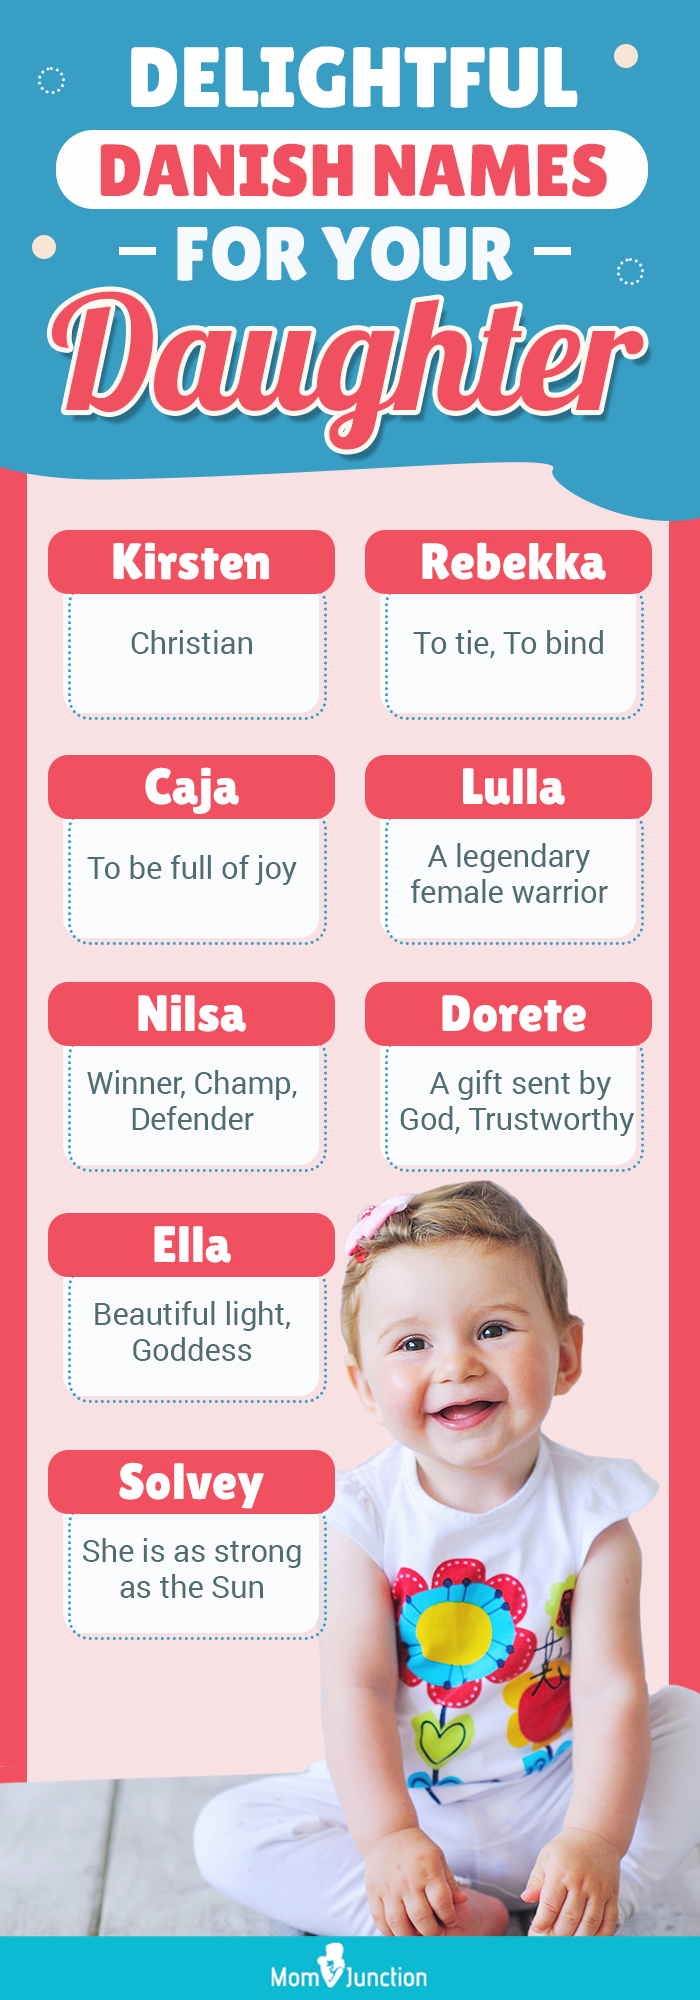 delightful danish names for your daughter (infographic)